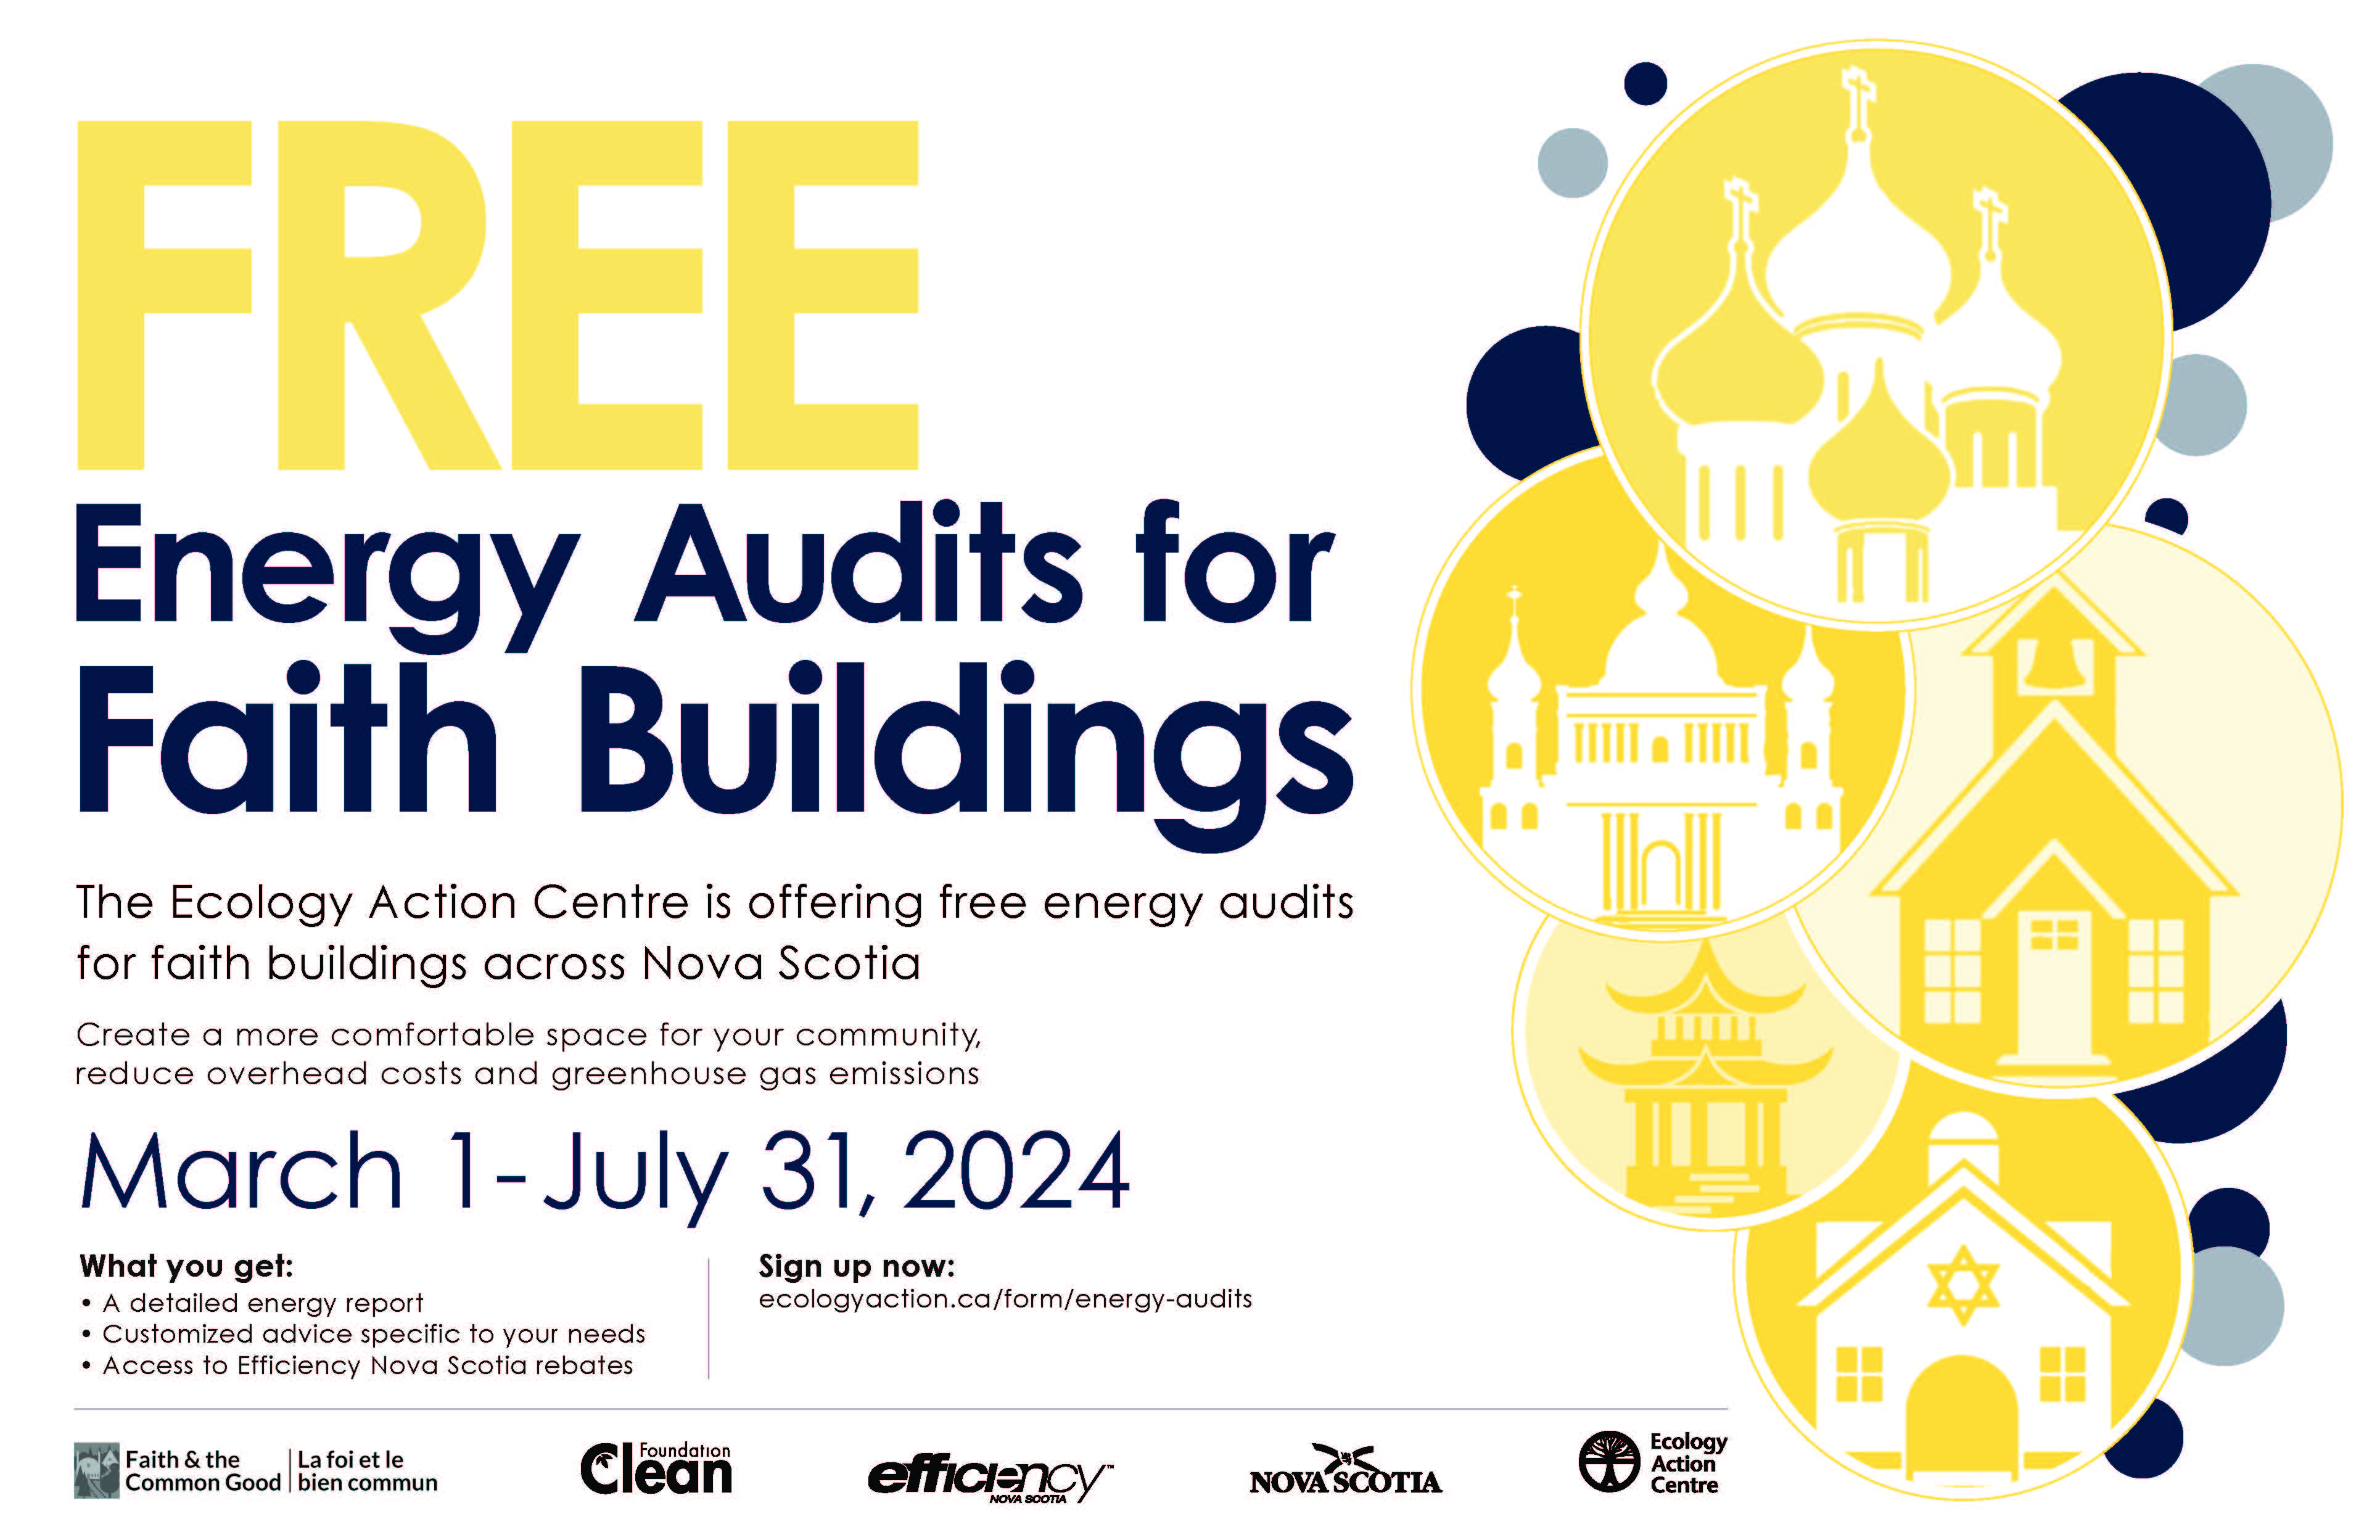 A graphic with information about Free Energy Audits for Faith Buildings